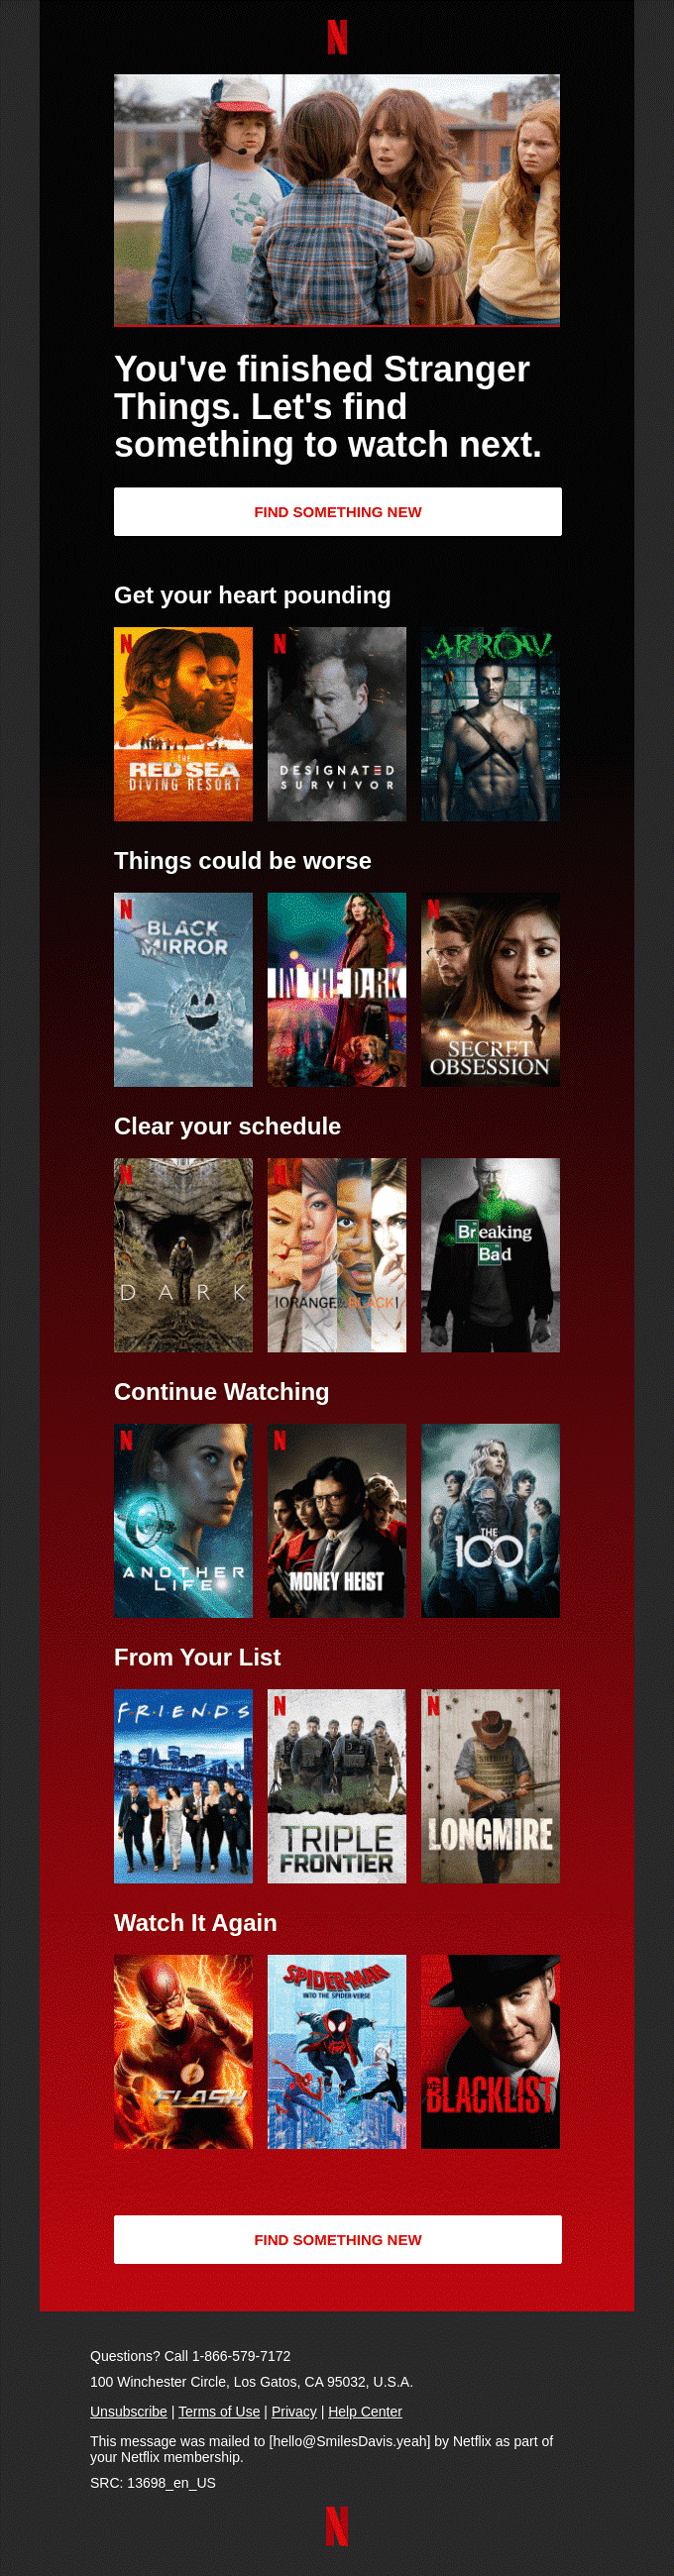 Netflix Personalizes Email Based on Watch History